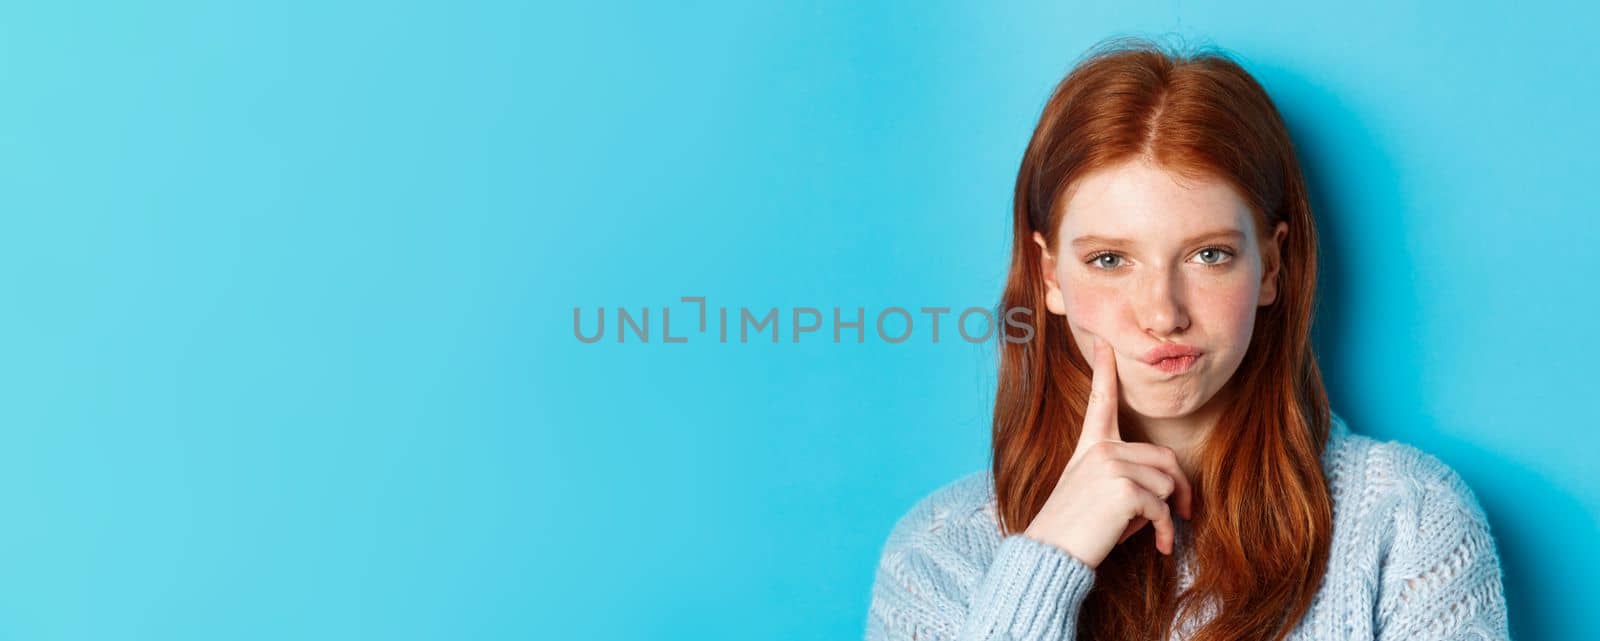 Puzzled redhead girl looking suspicious at camera, thinking or solving problem, standing against blue background.